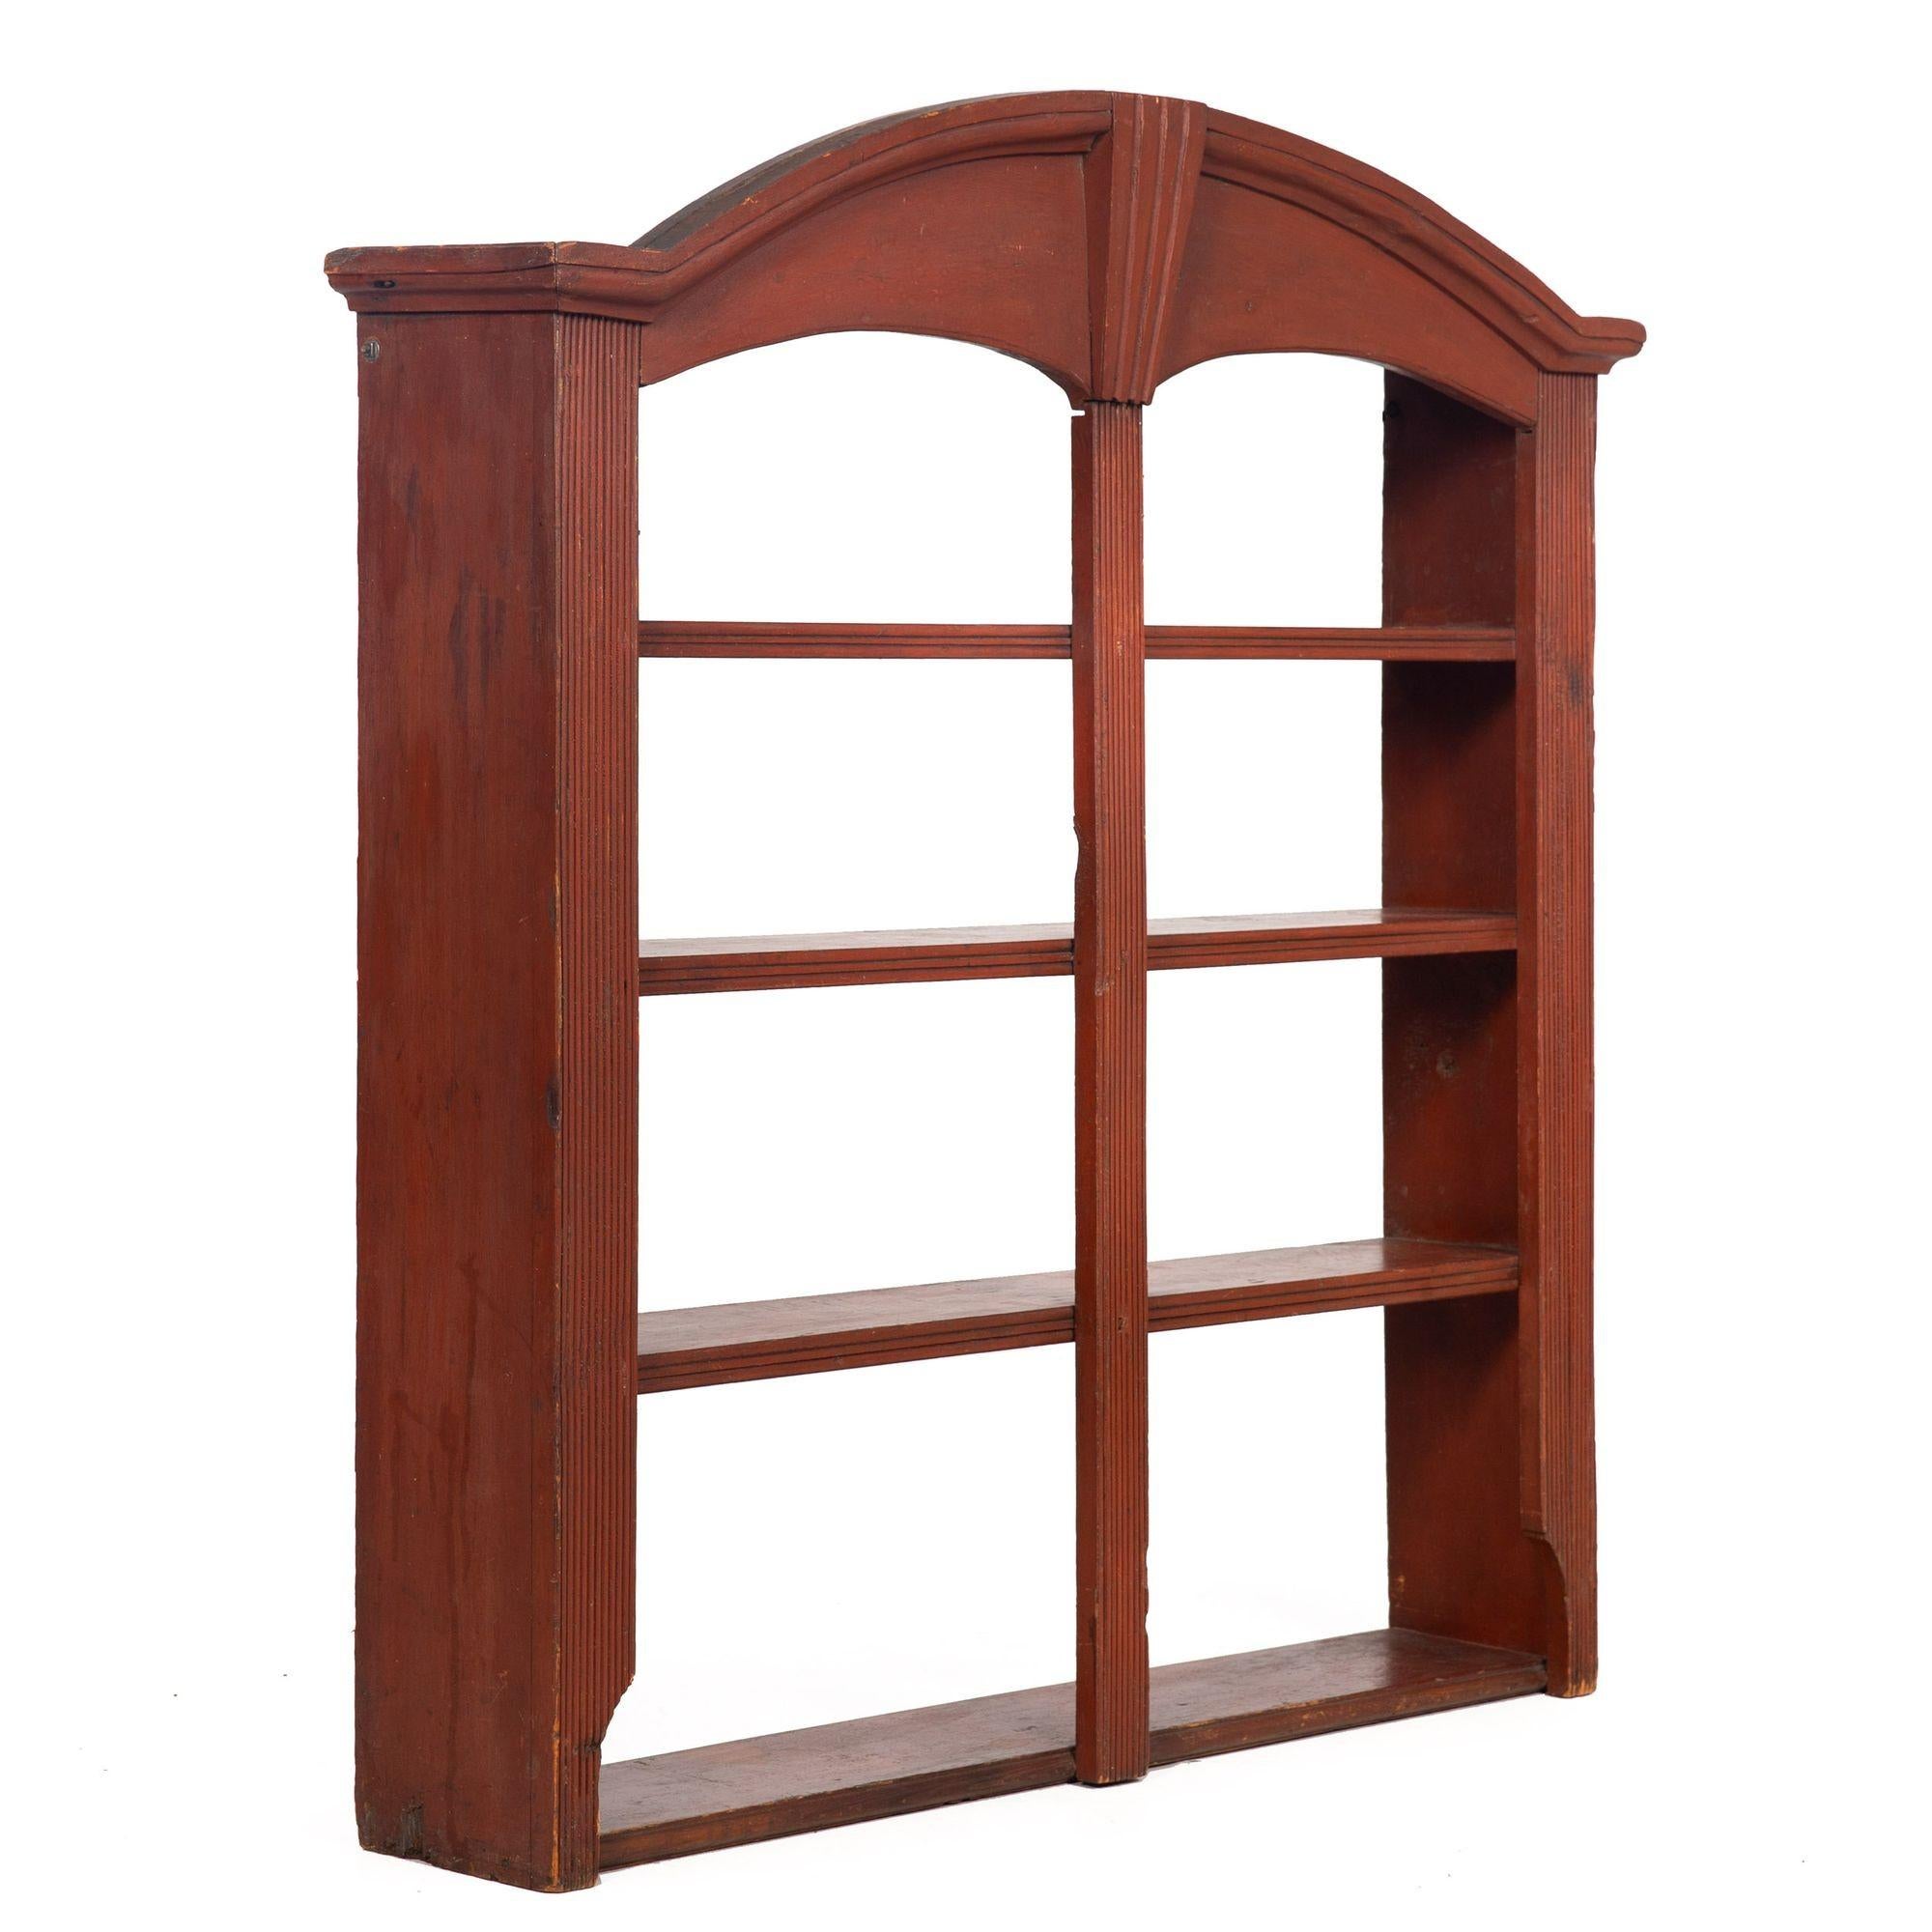 AMERICAN RED-PAINTED HANGING WALL SHELF
Probably Pennsylvania circa the first half of the 19th century
Item # 310ZPI05Q 

A compelling and most useful open bookcase, the simple and austere form features an arched and molded cornice around a central